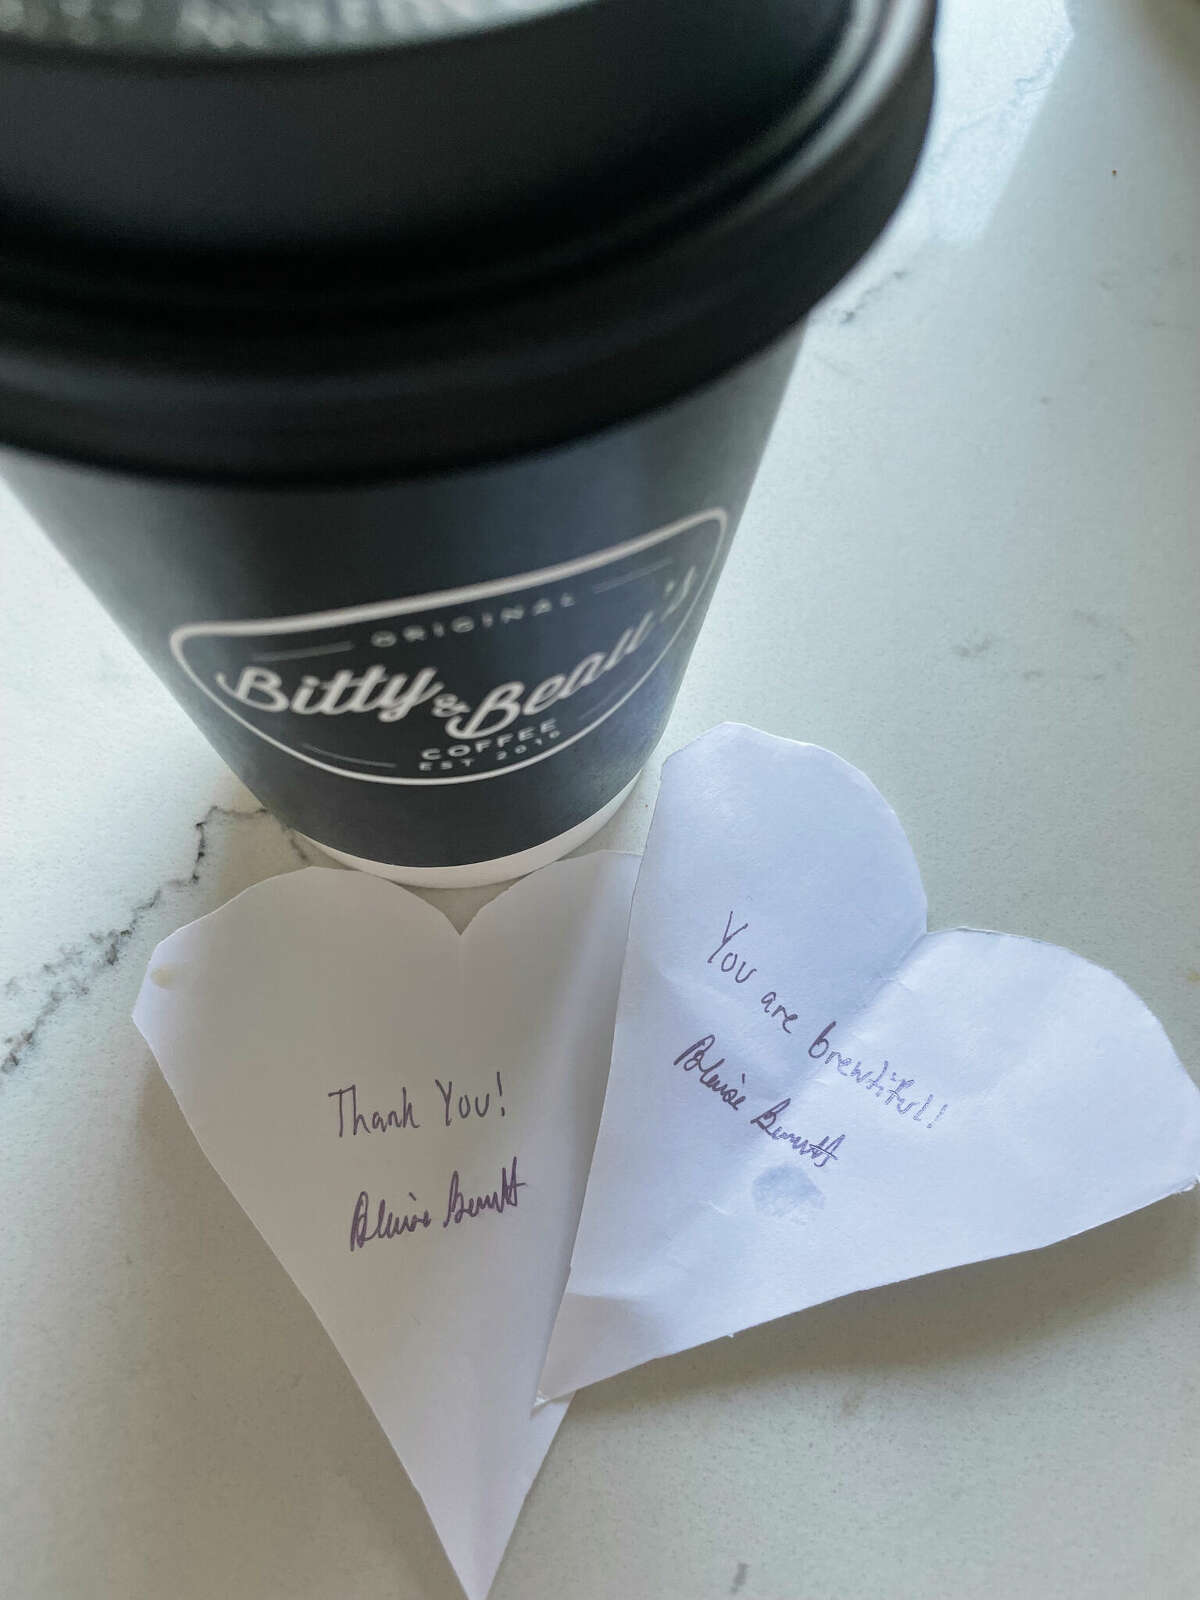 When you pick up your order at Bitty and Beau's, you get a heart cut-out with a hand-written message.